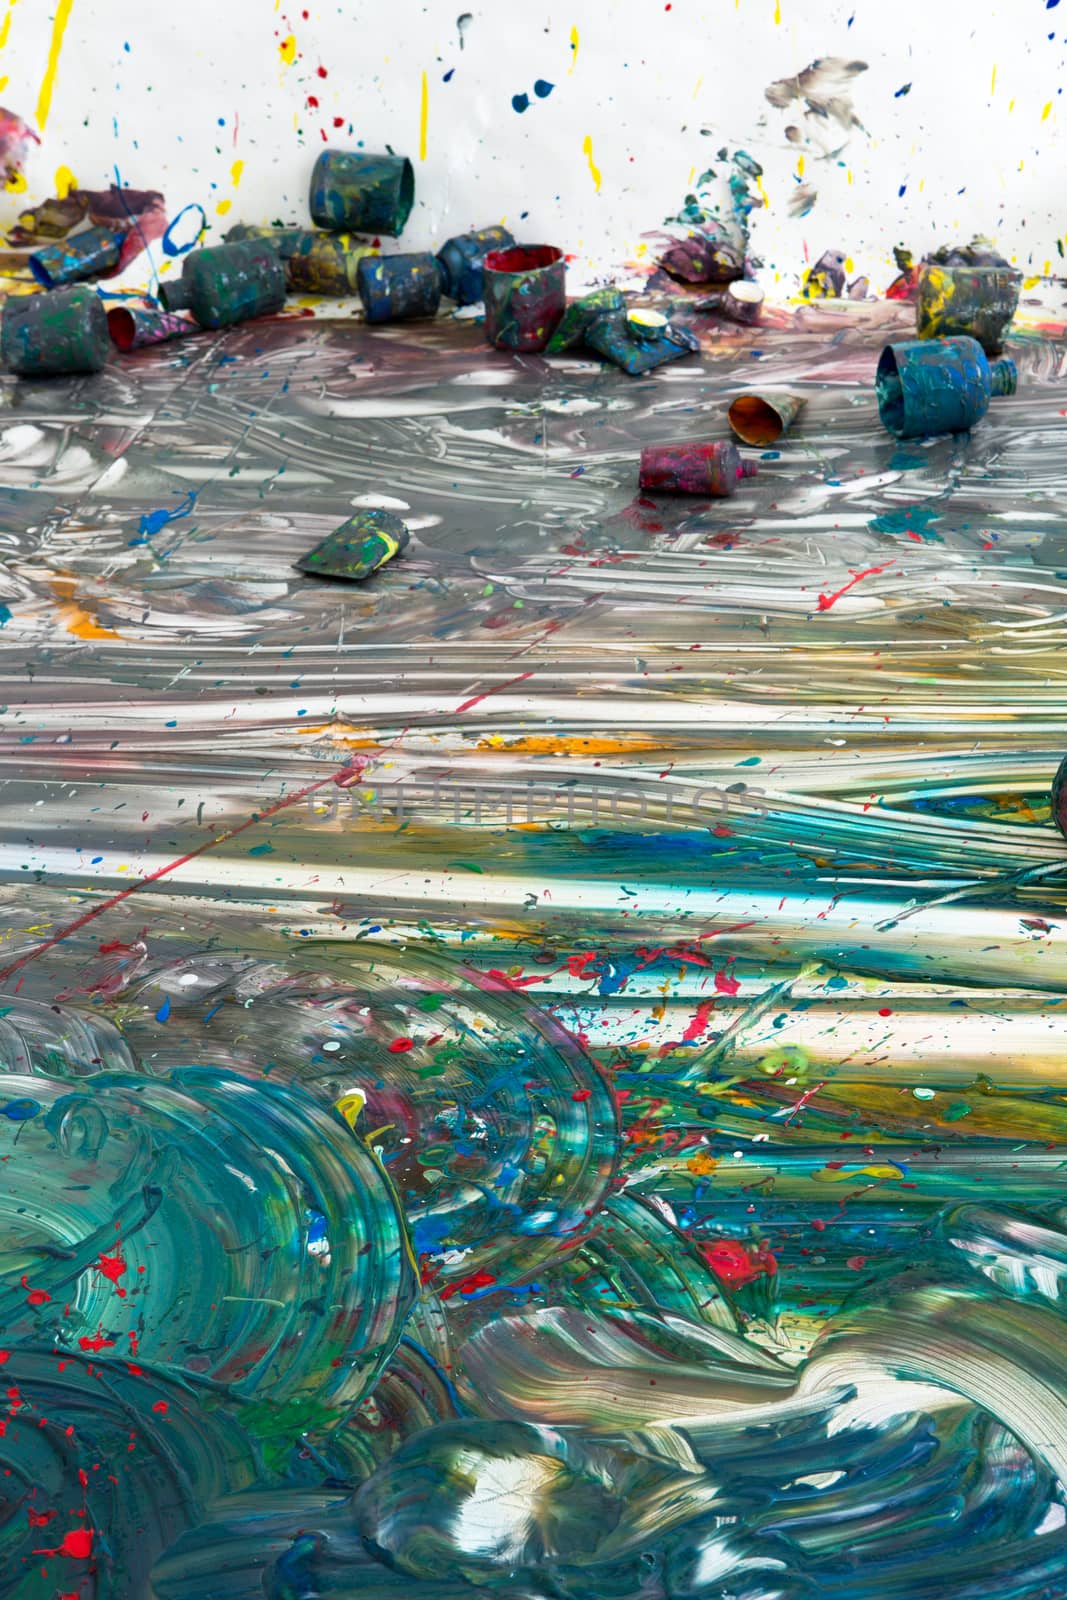 Colorful Contemporary Artwork on the Floor by coskun